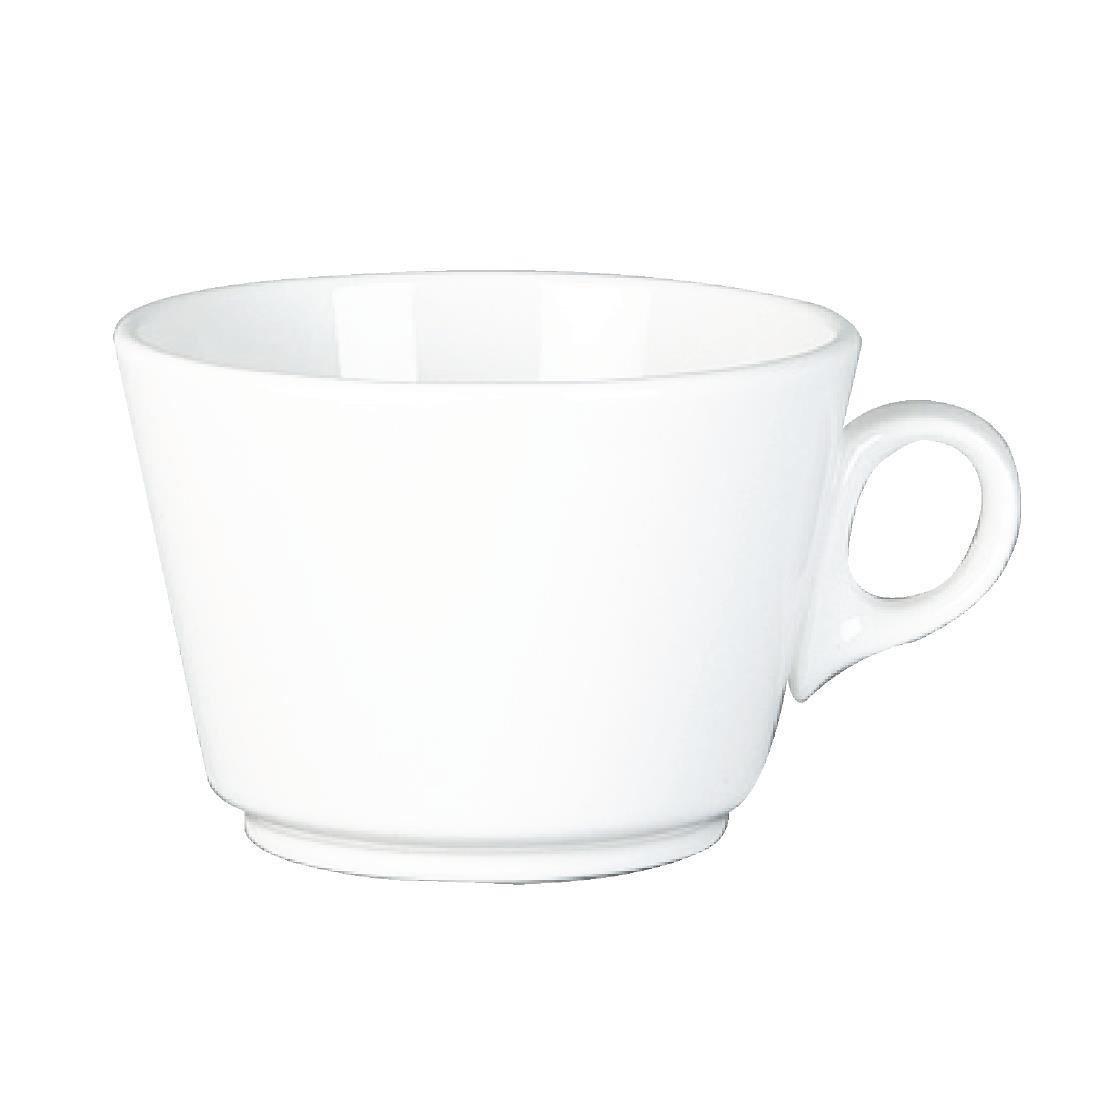 Steelite Simplicity White Grand Cafe Cups 170ml (Pack of 36) - V7456  - 1